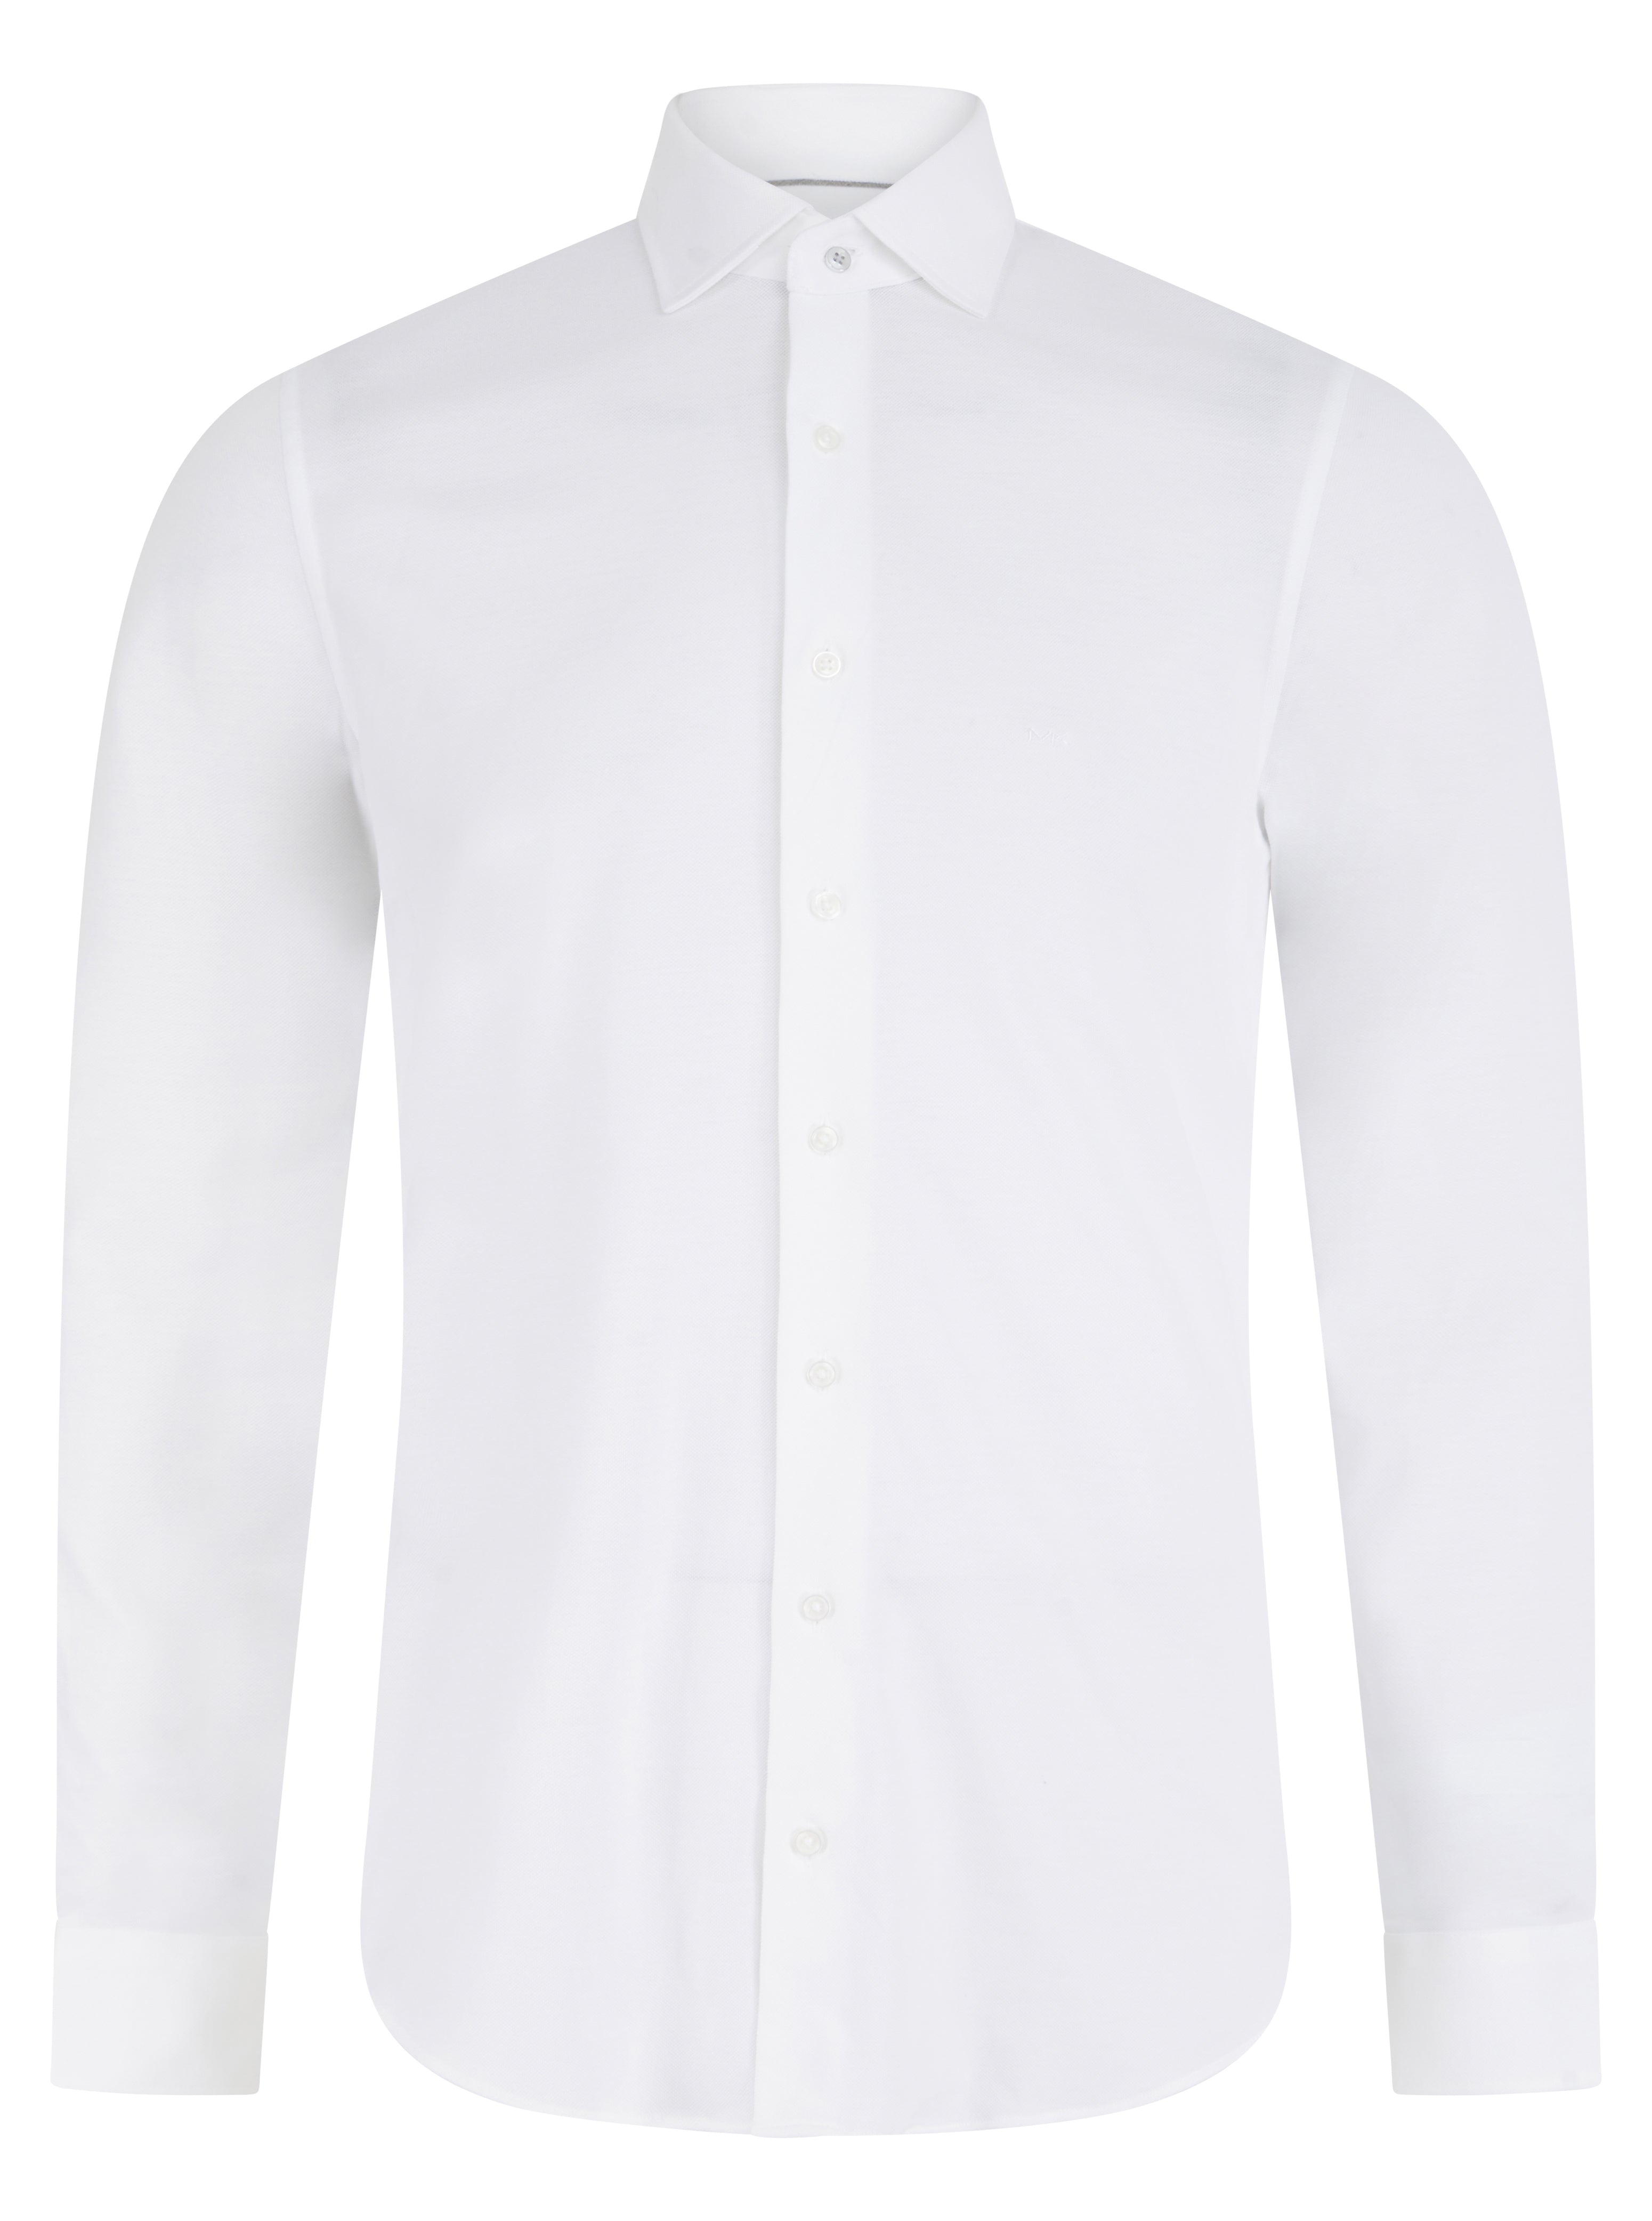 Load image into Gallery viewer, Michael Kors Pique Shirt White
